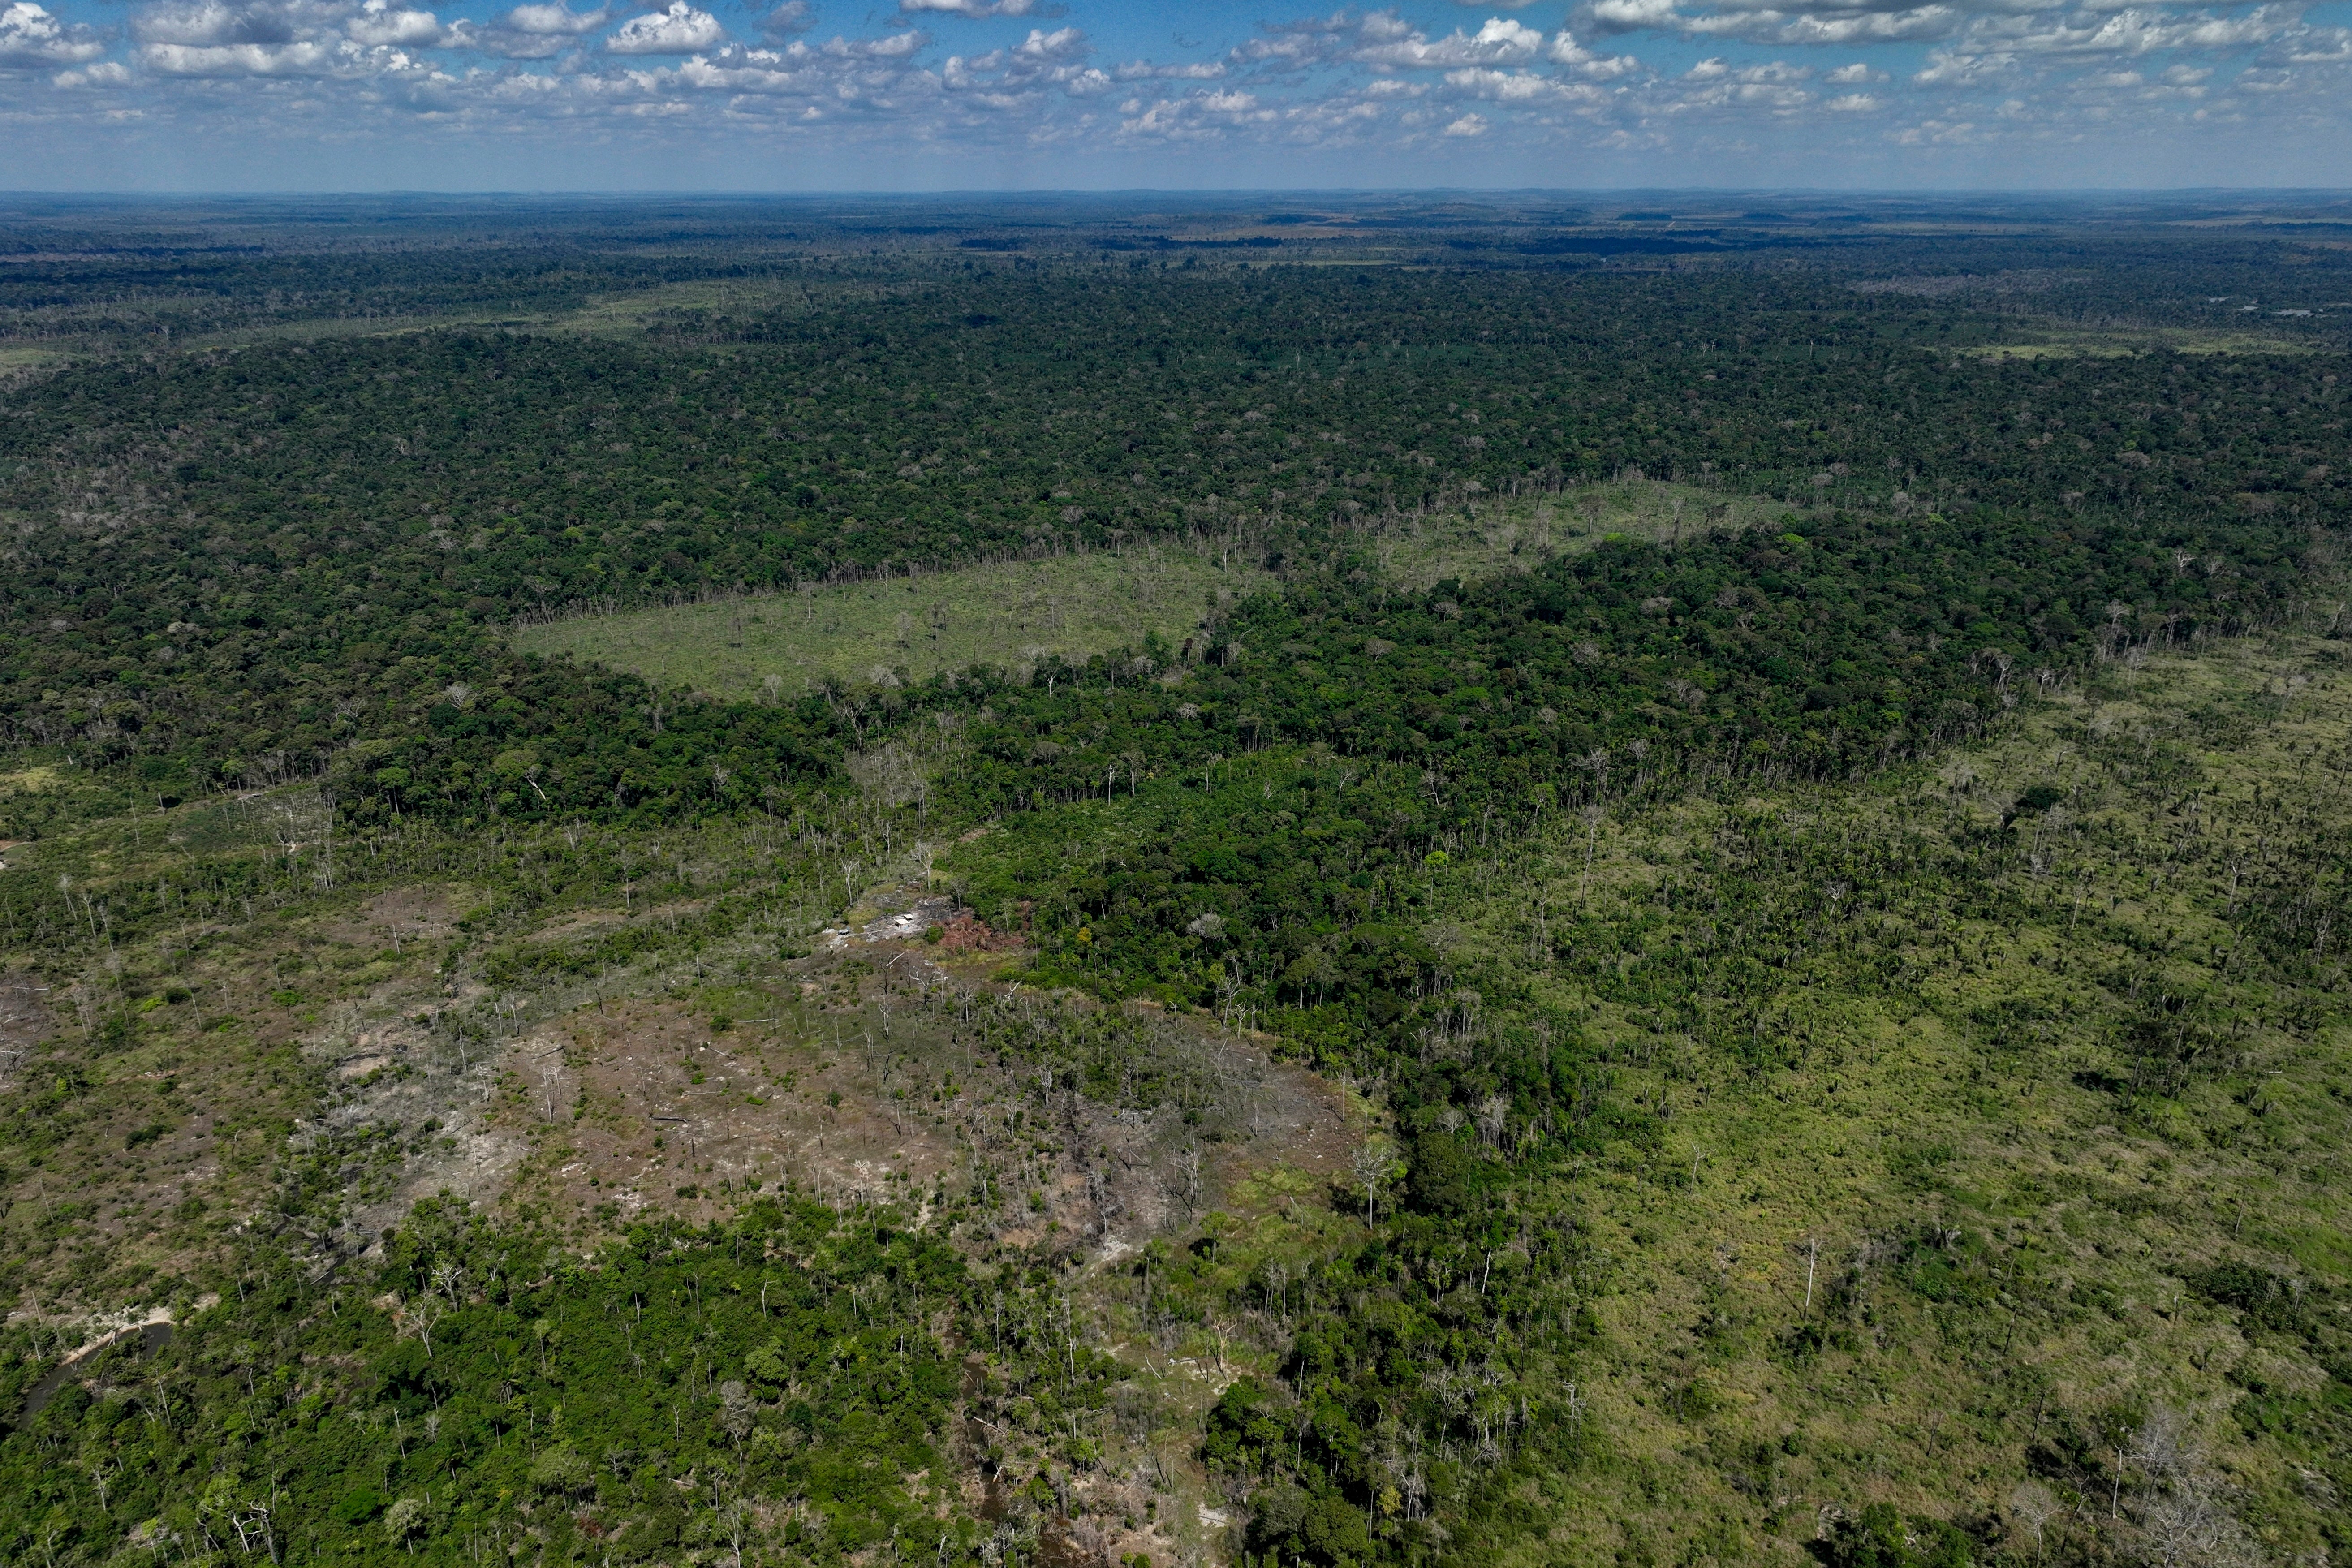 Illegall deforestation by land-grabbers and cattle farmers is a problem in Brazil